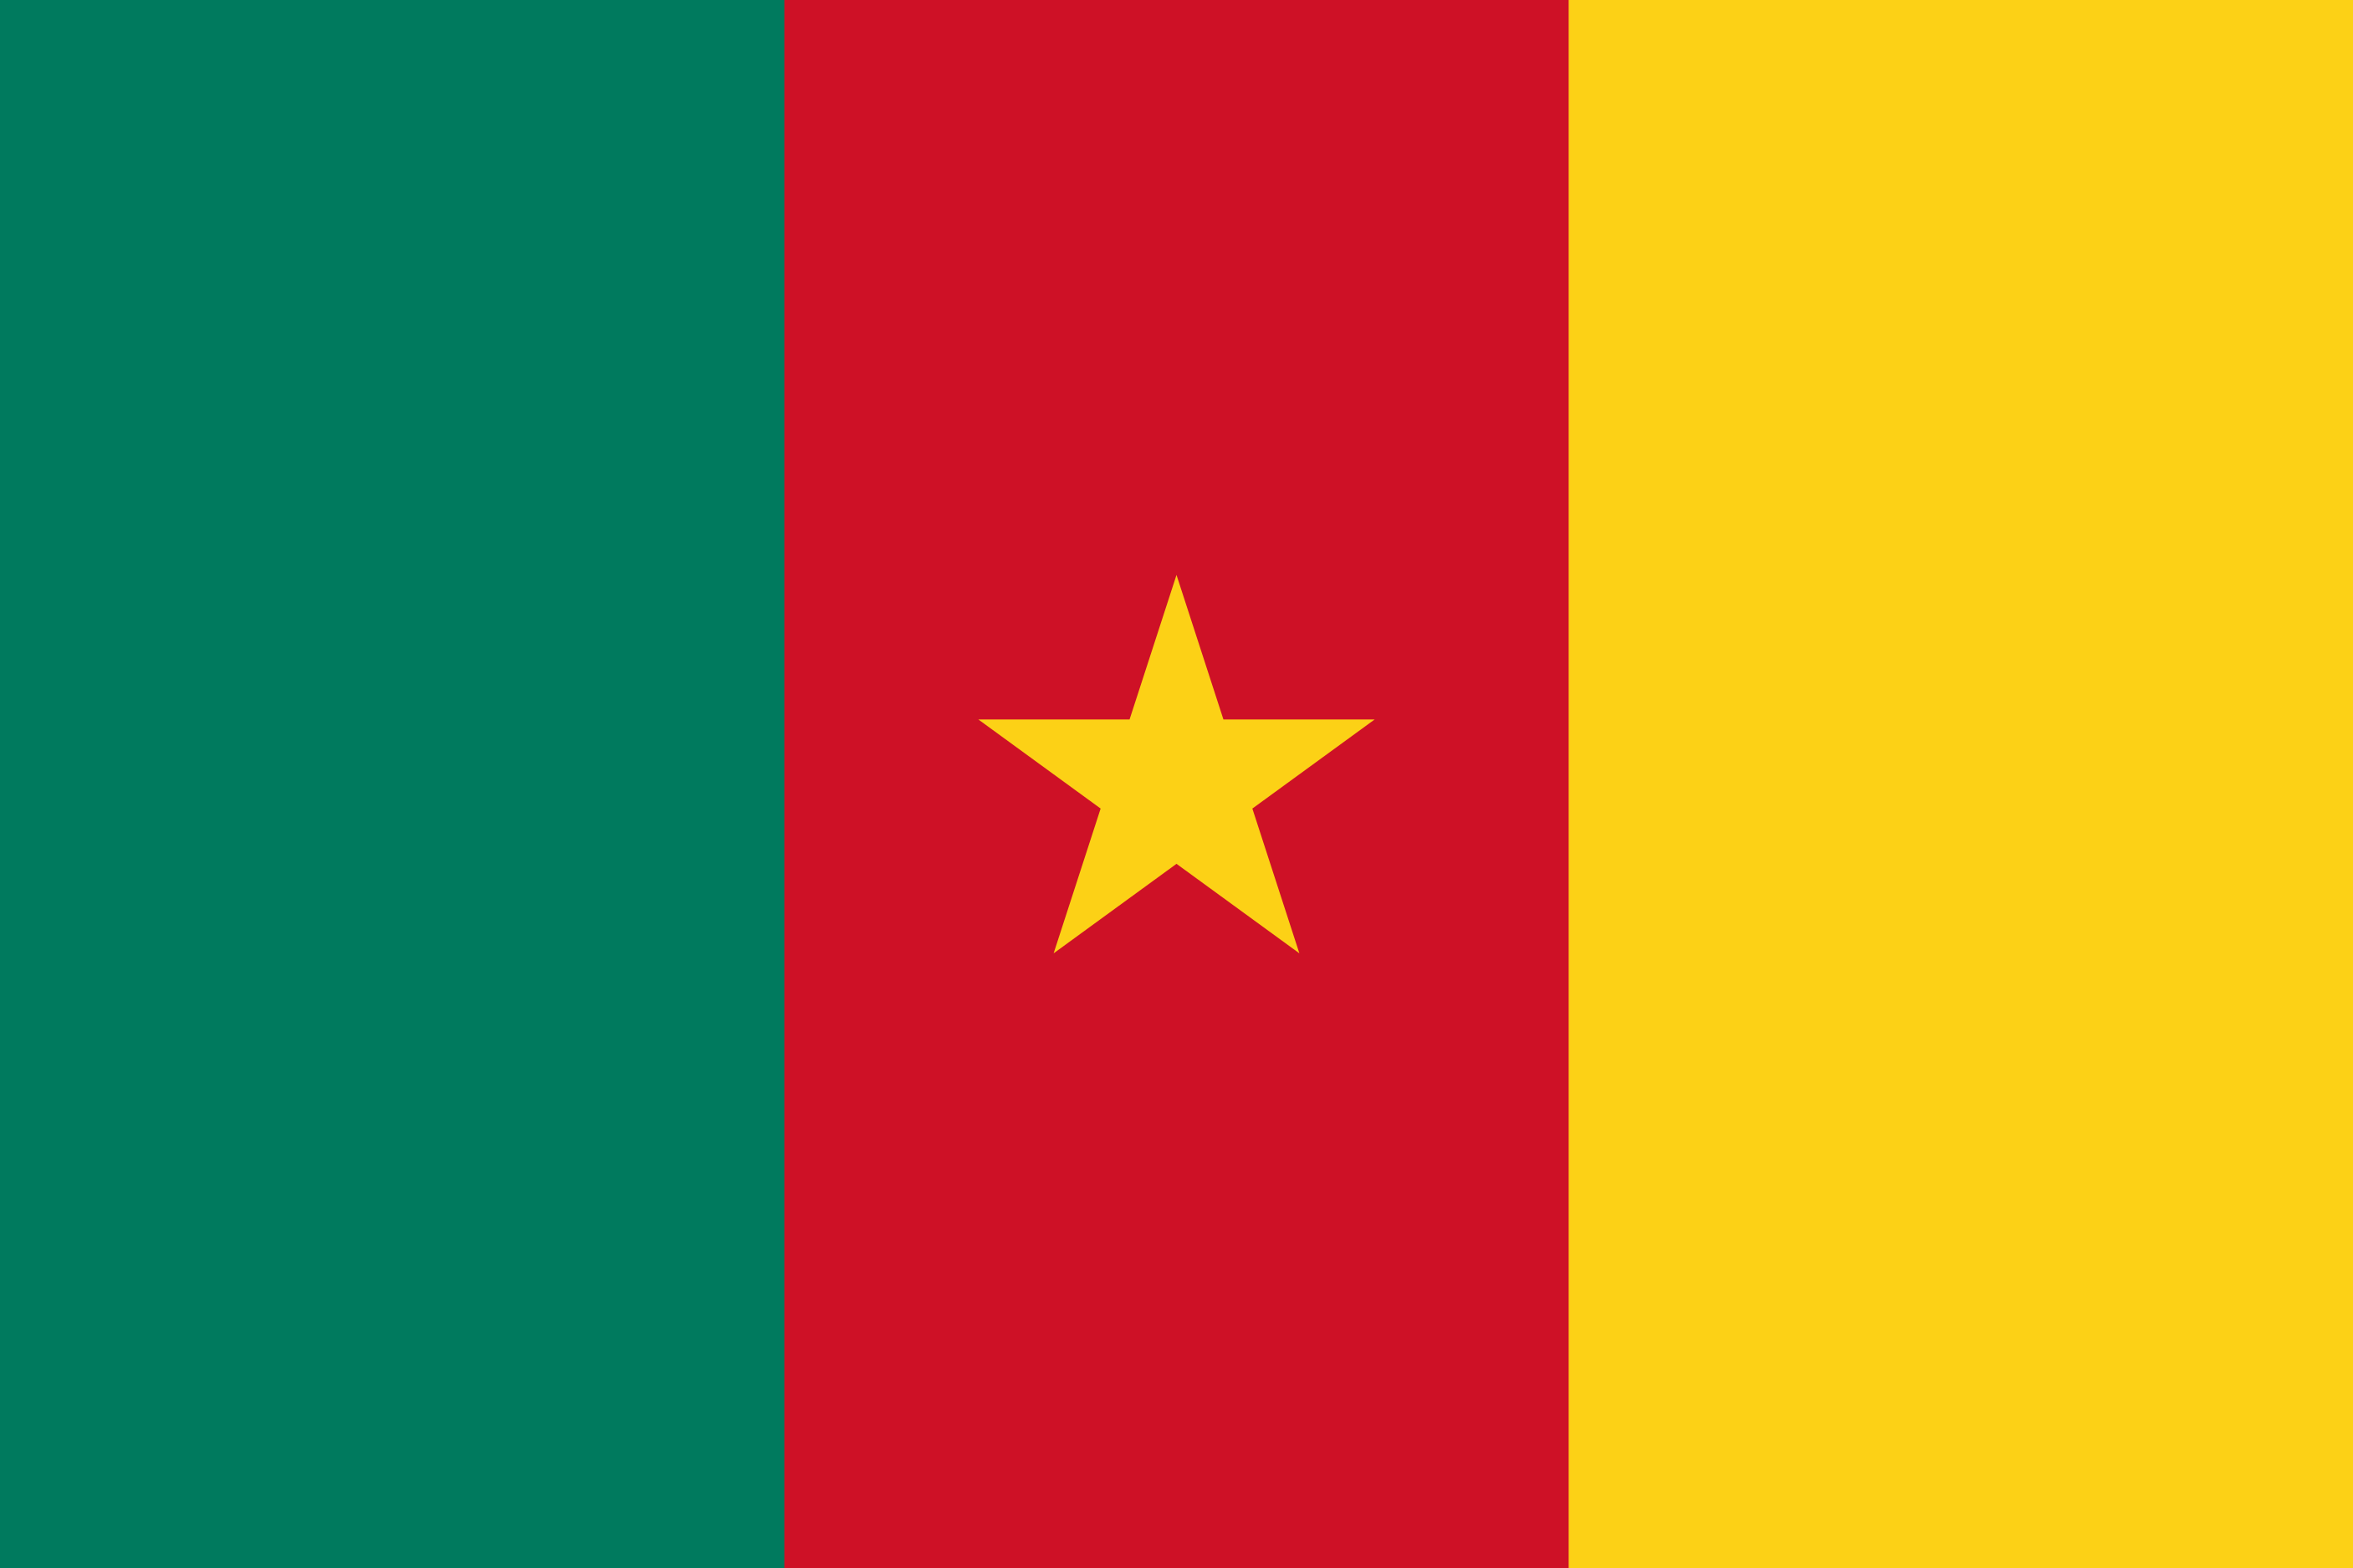 Free Cameroon Flag Documents: PDF, DOC, DOCX, HTML & More!